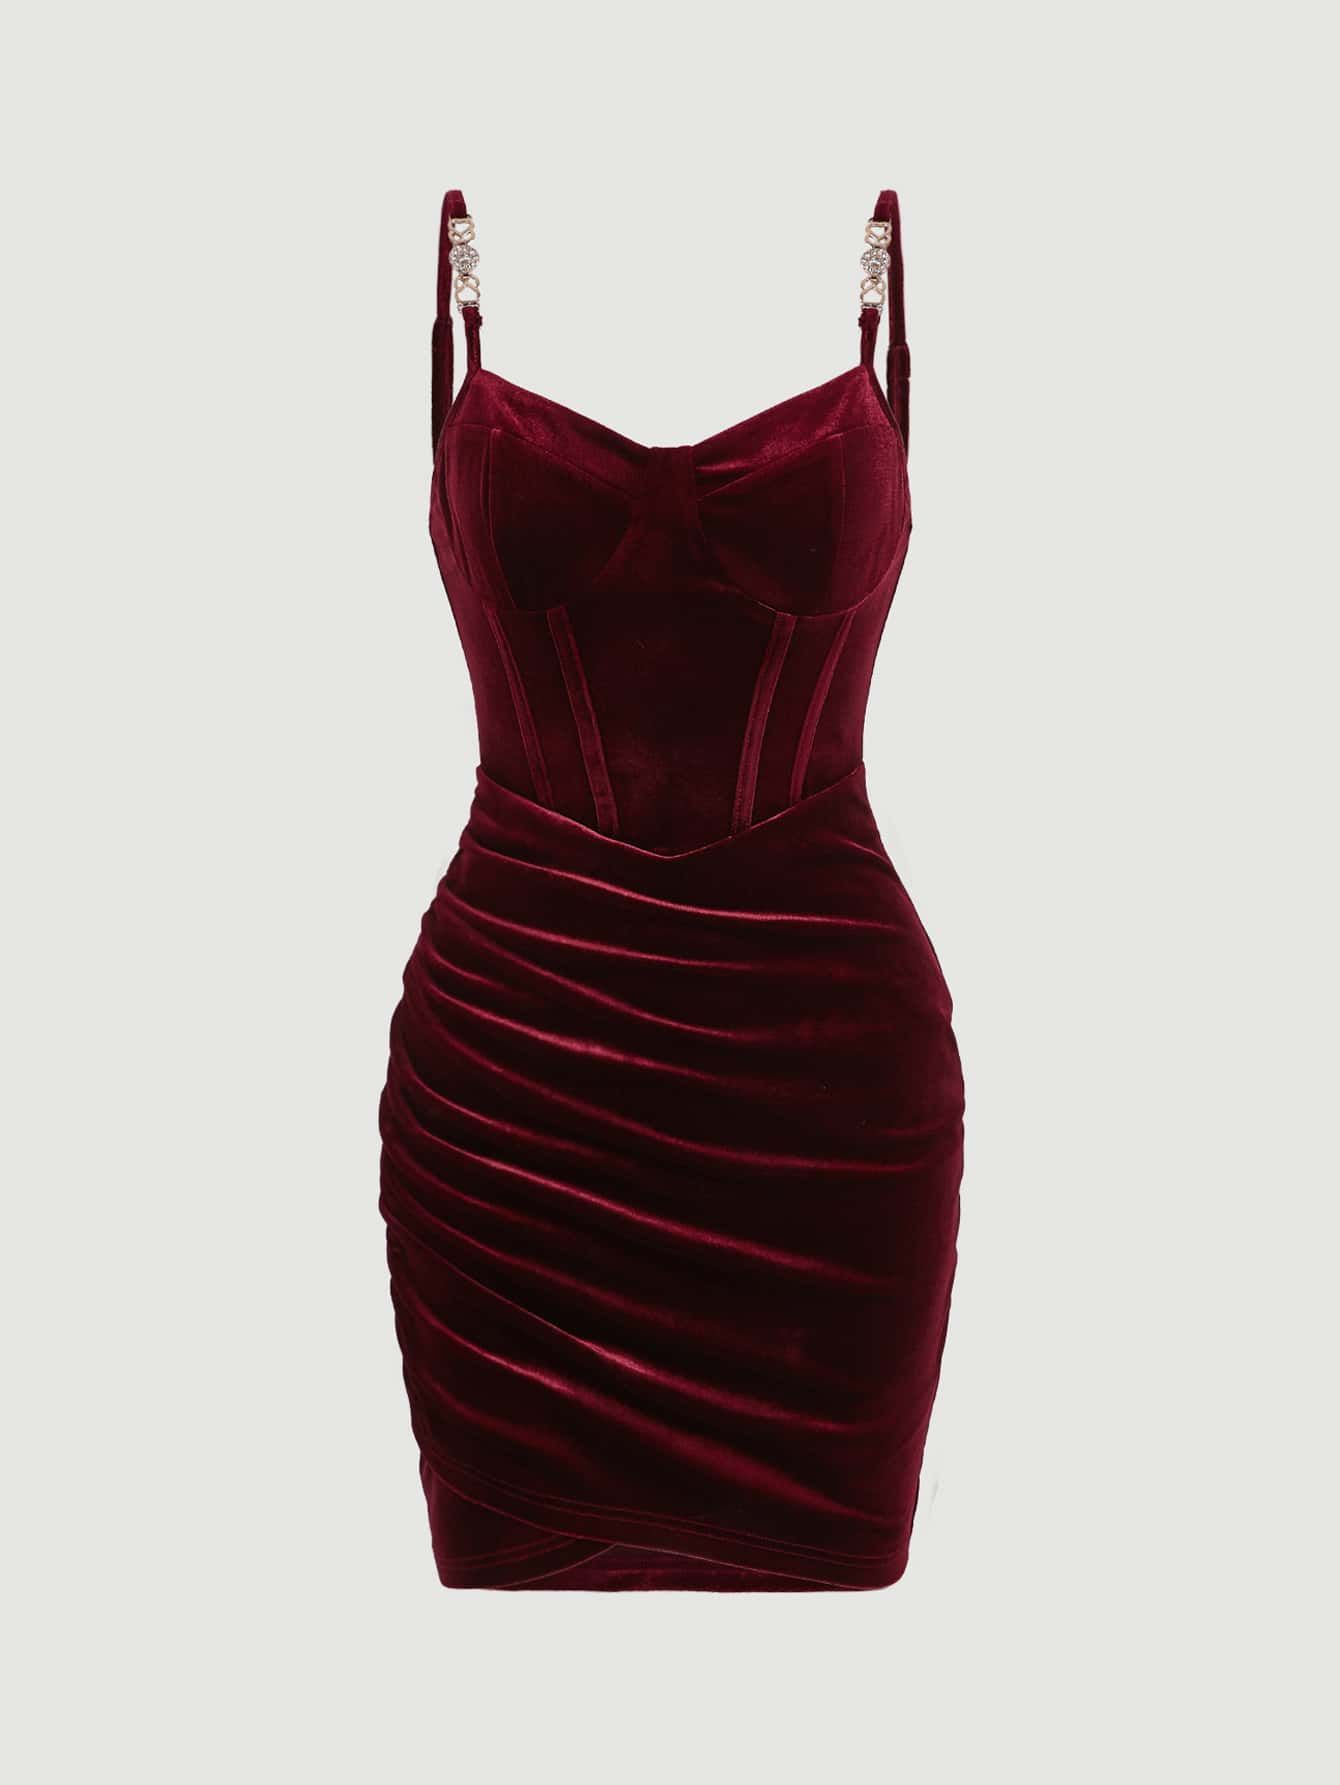 Maroon Dress: Rich and Elegant Attire for Every Occasion